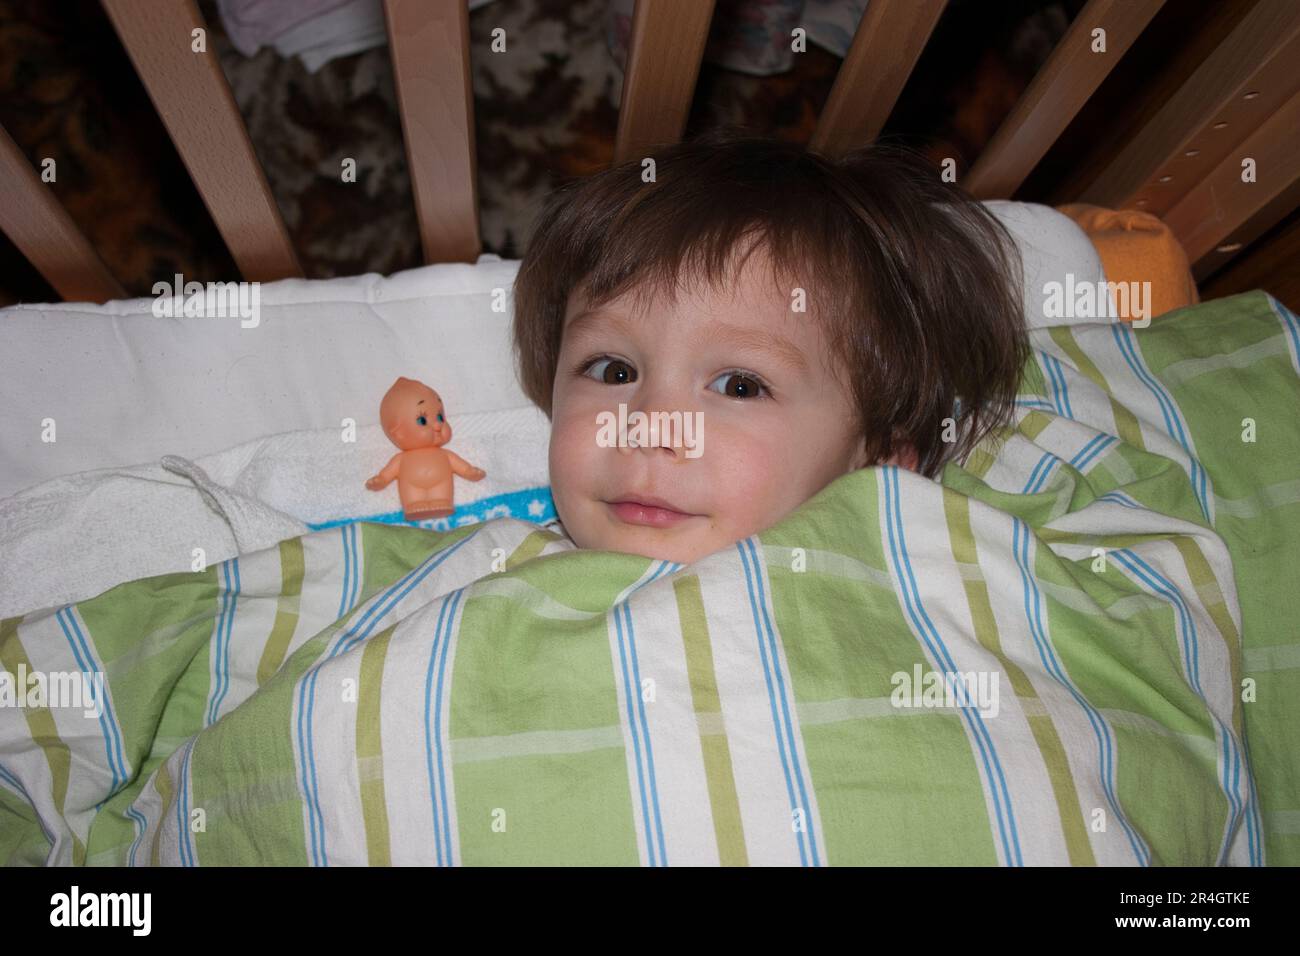 One year old Caucasian child, boy, laying in cot with duvet over him, with his 'friend,' a kewpie doll next to him. Eye-contact. Stock Photo